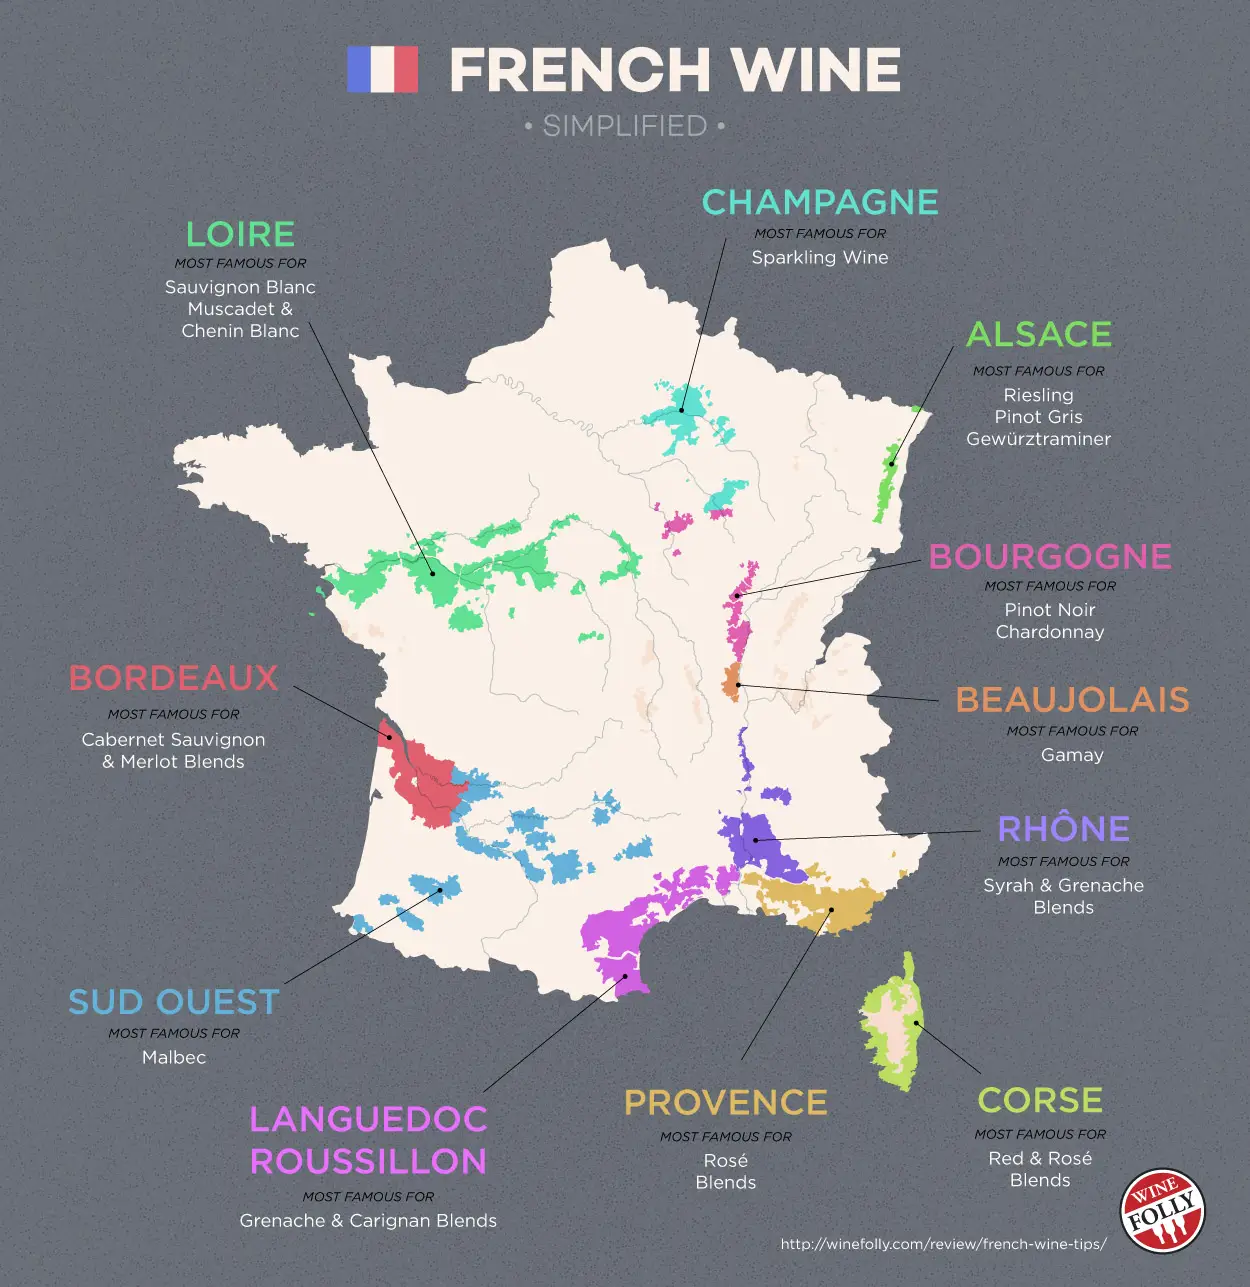 THE WINES OF FRANCE